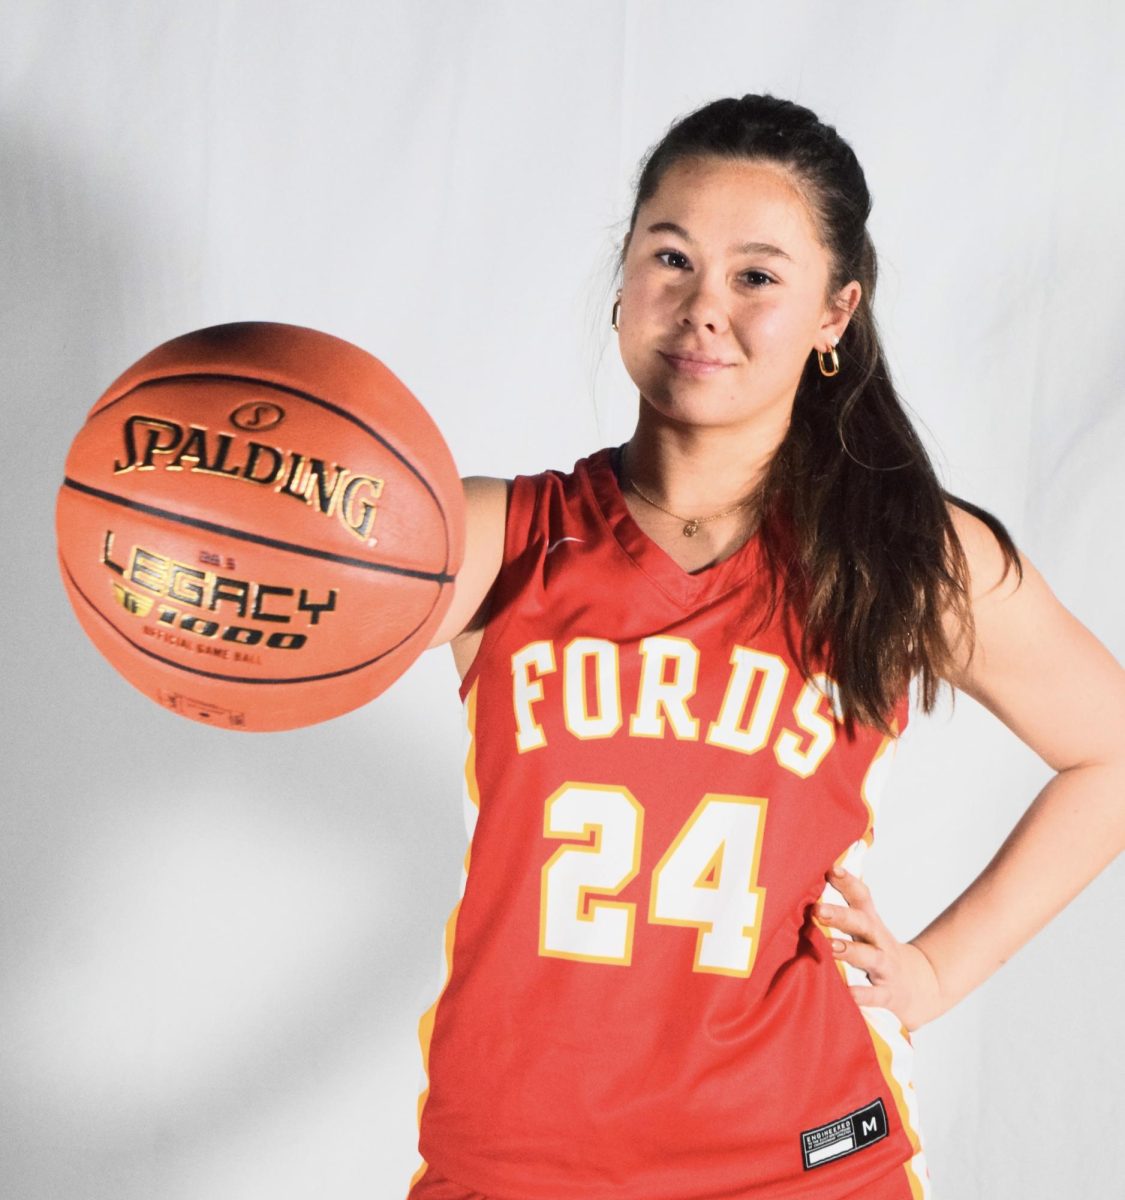 Mya Foley shows her H-Pride at media day, preparing for an exciting basketball season.